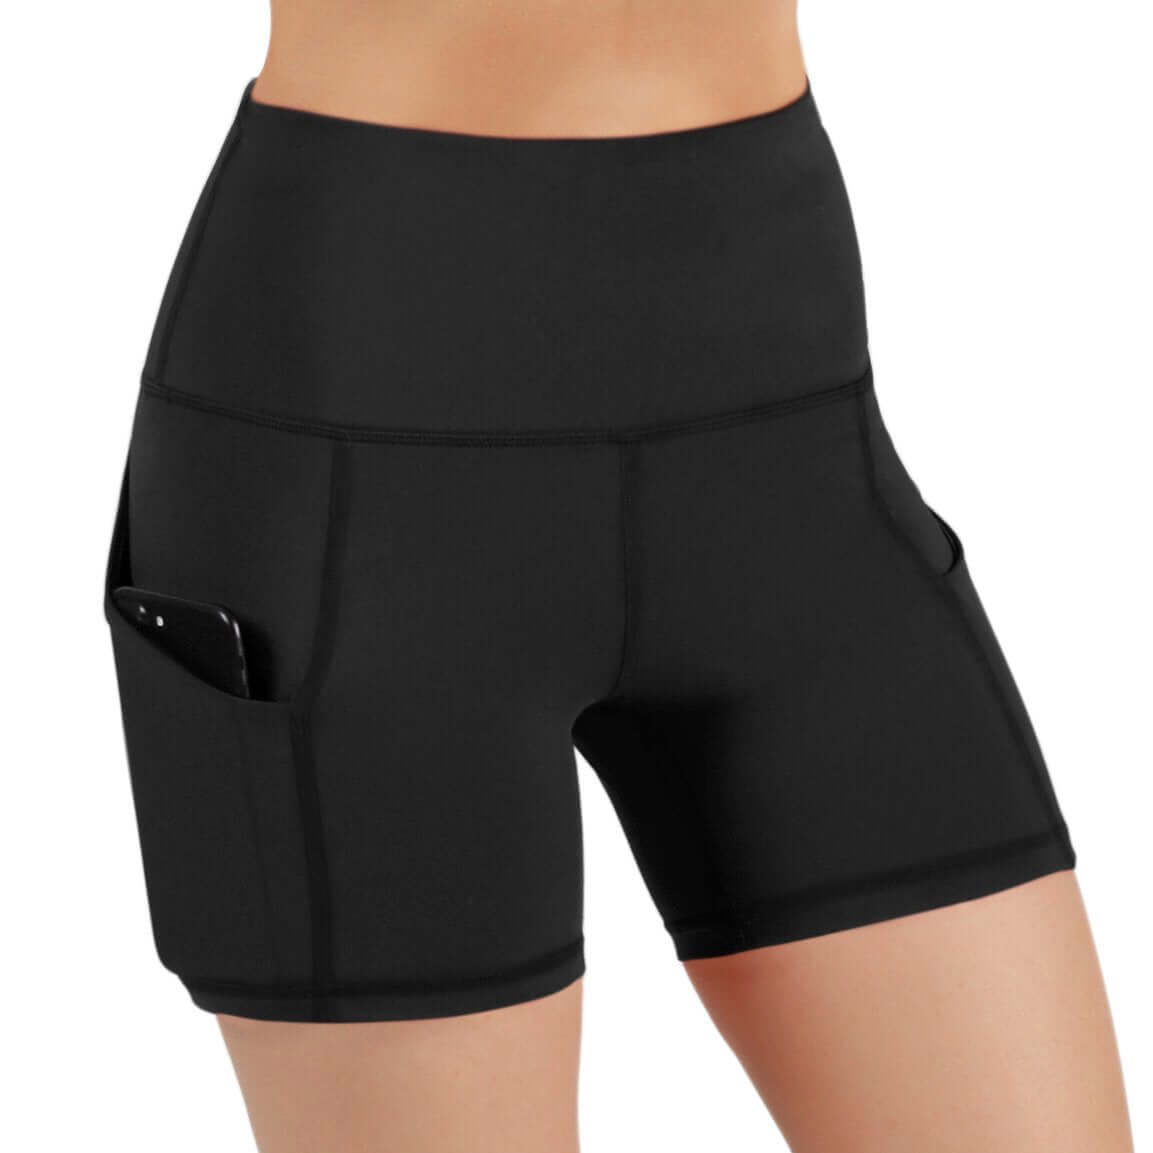 JupiterGear  Jolie High-Waisted Athletic Shorts with Hip Pockets